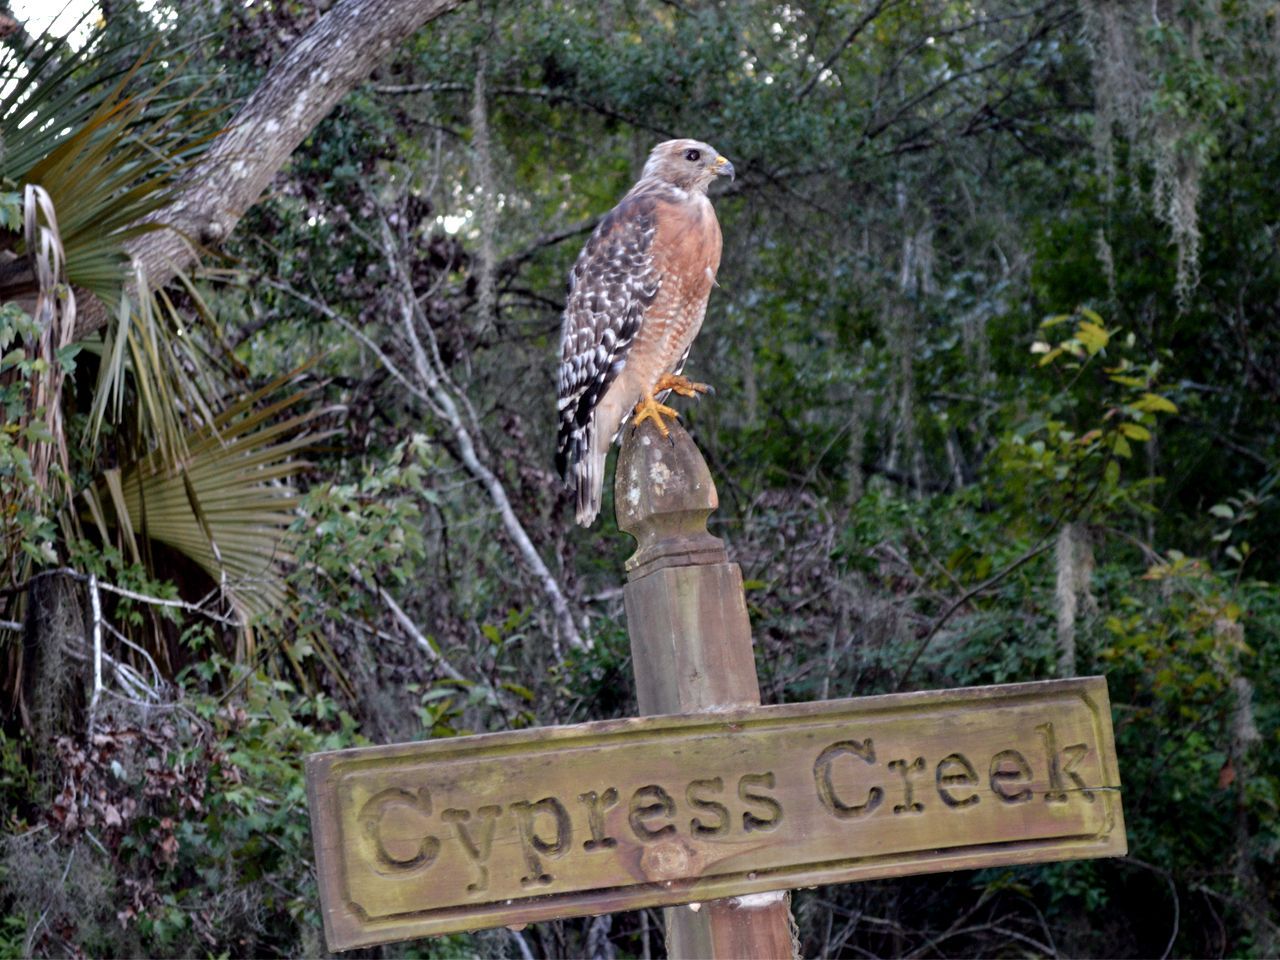 a bird perched on top of a sign that says cypress creek